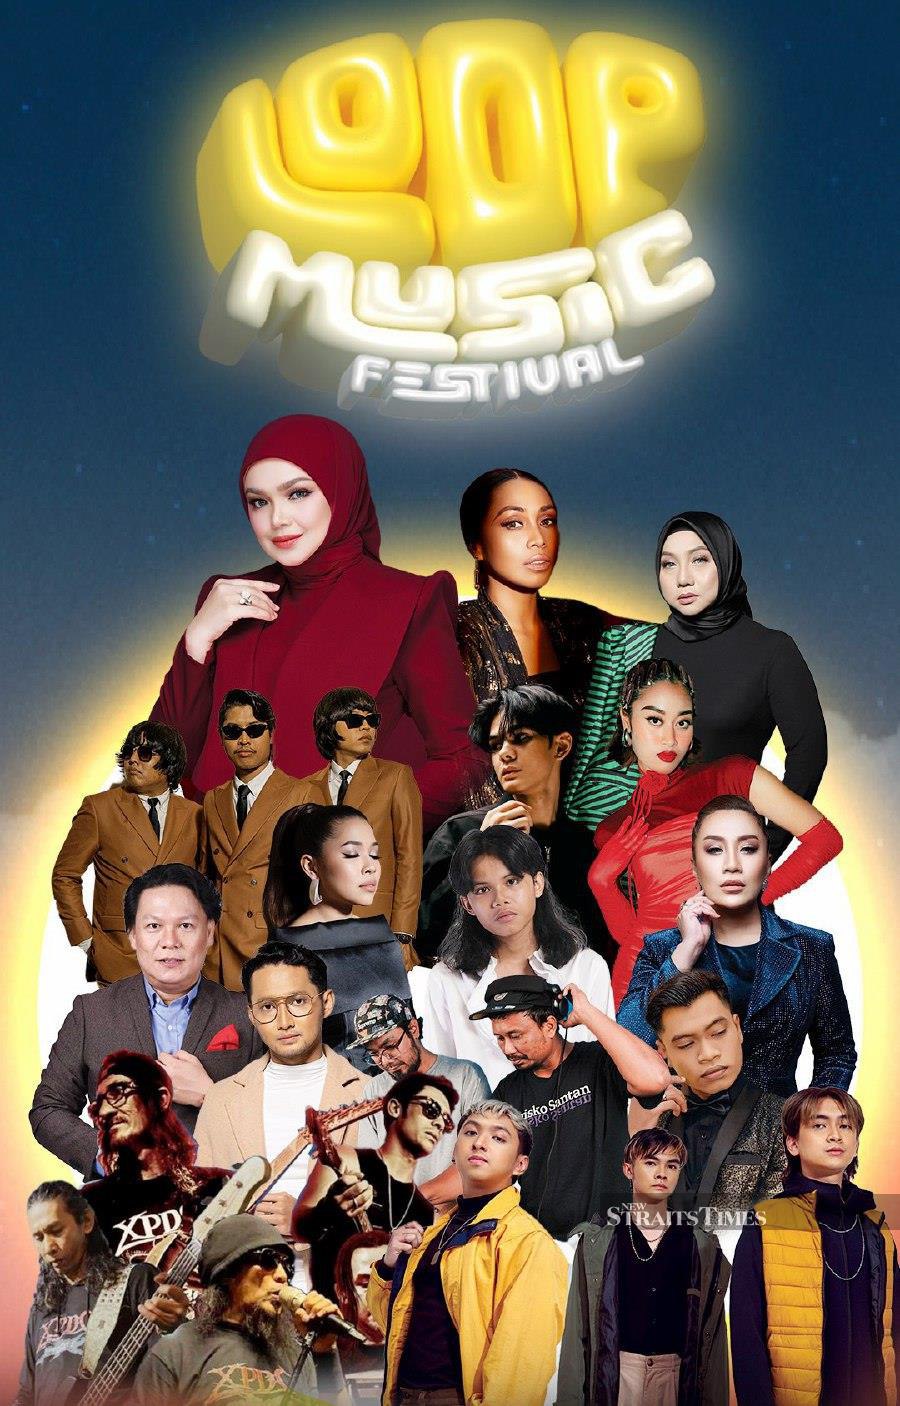 A variety of popular local artistes from different music genres and age groups are set to entertain music fans at the Loop Music Festival on May 11. – PIC COURTESY OF LOOP MUSIC FEST 